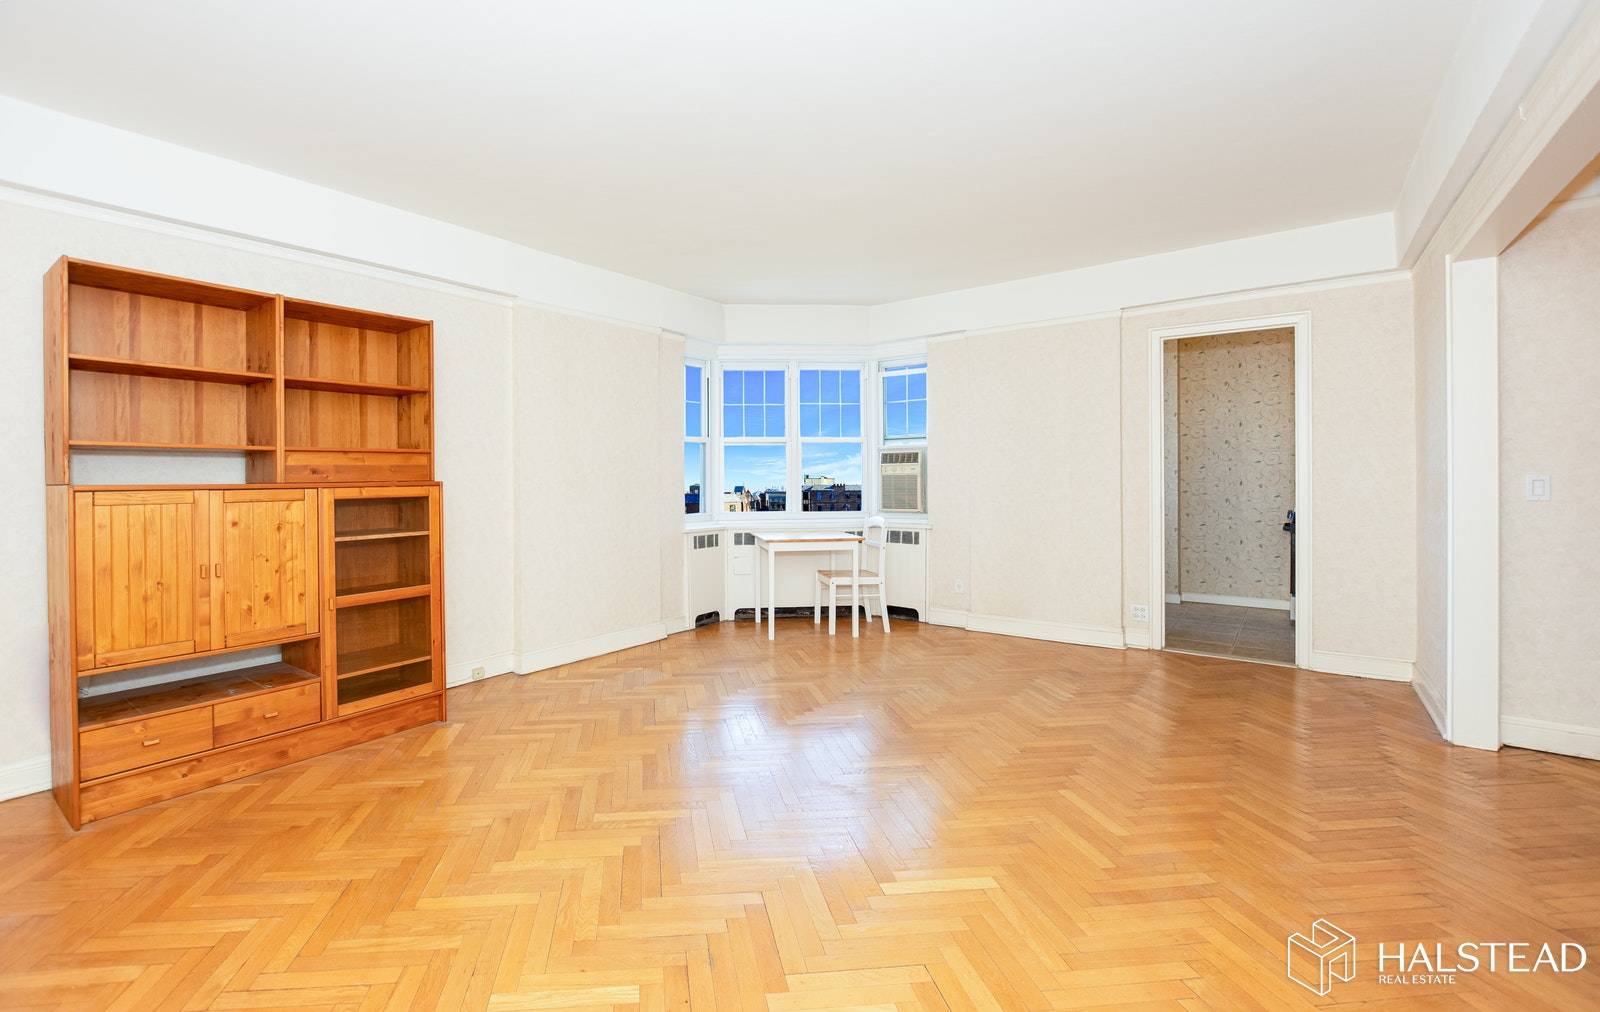 This spacious 553 Sq. Ft studio apartment offers charm, comfort and beautiful city views.